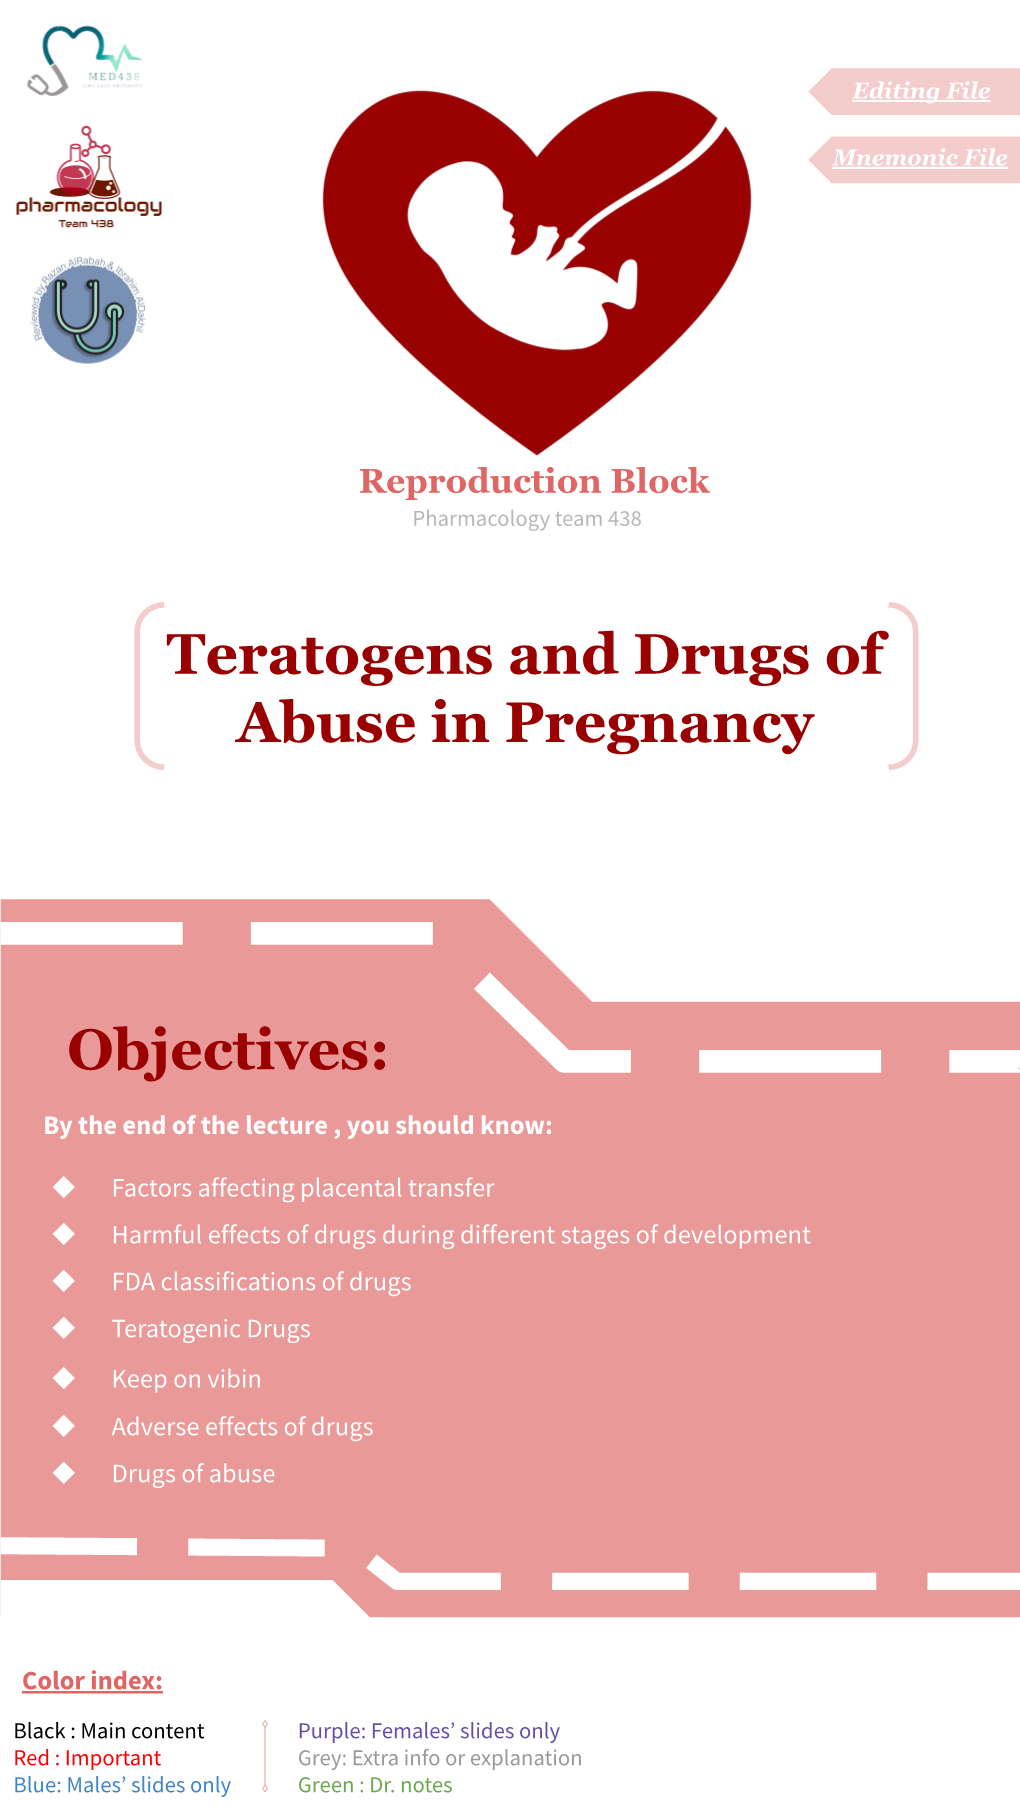 Objectives: Teratogens and Drugs of Abuse in Pregnancy